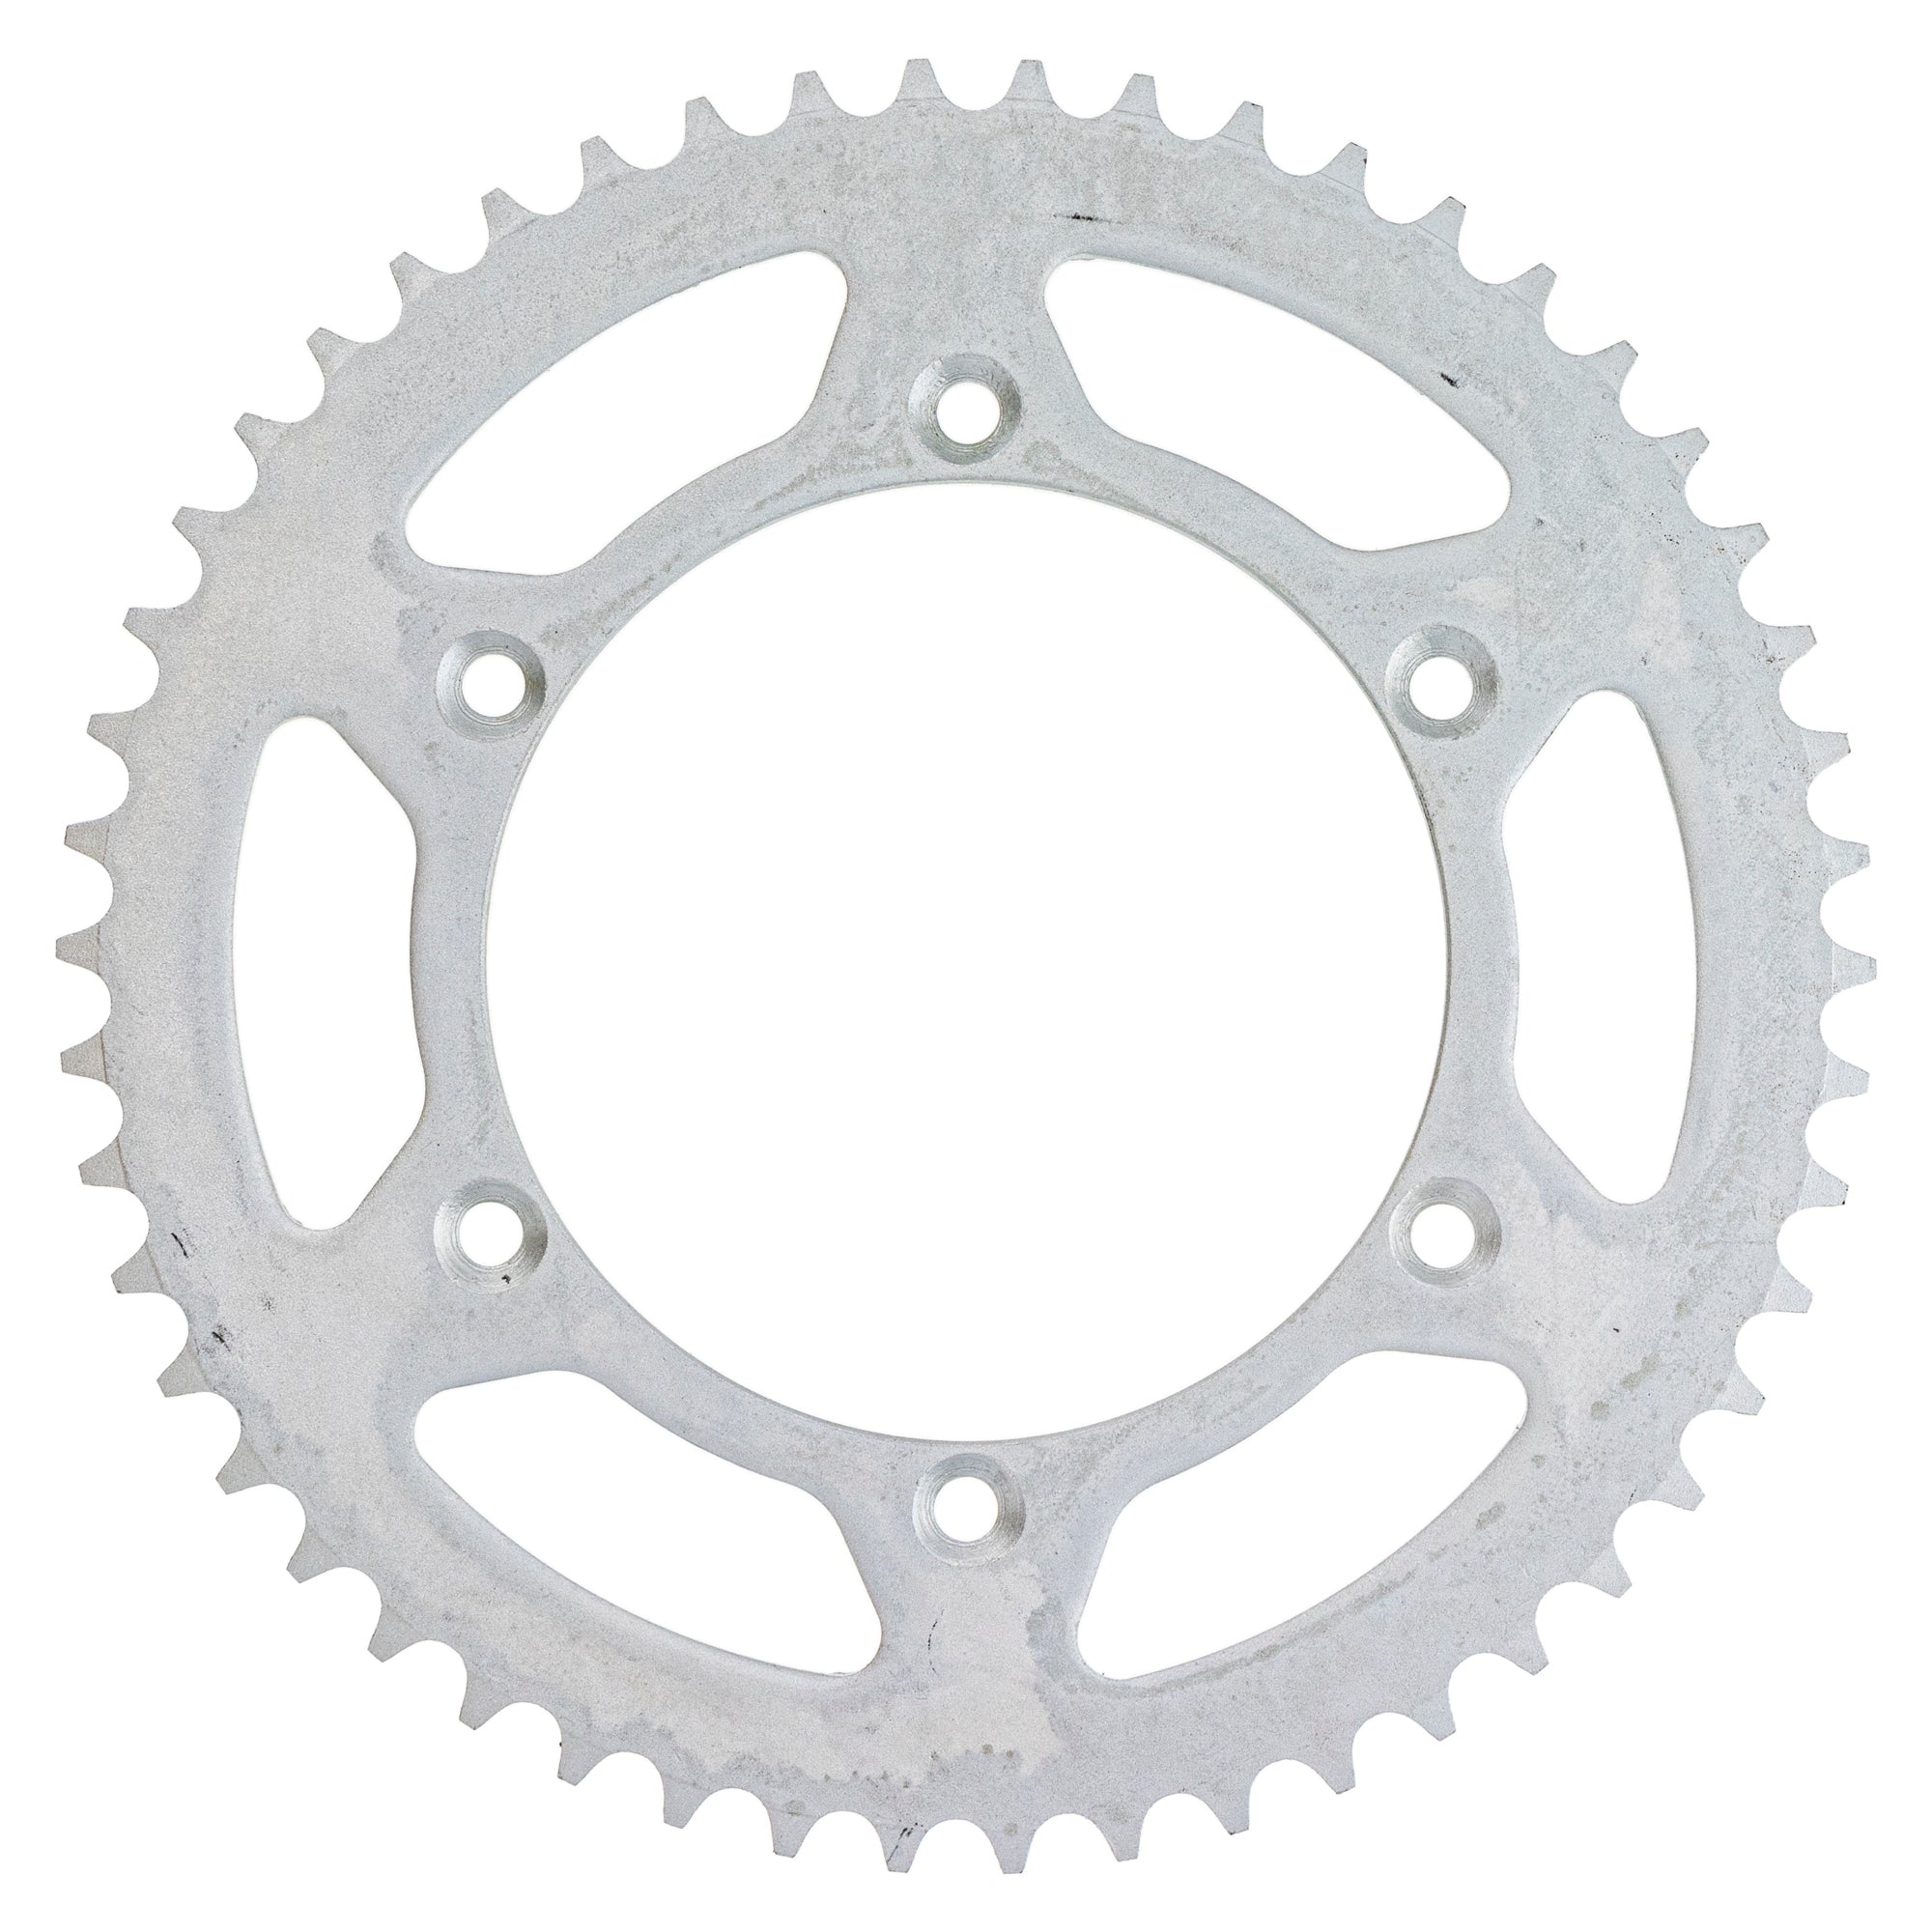 520 Pitch Front 14T Rear 50T Drive Sprocket Kit for Beta RR 400 450